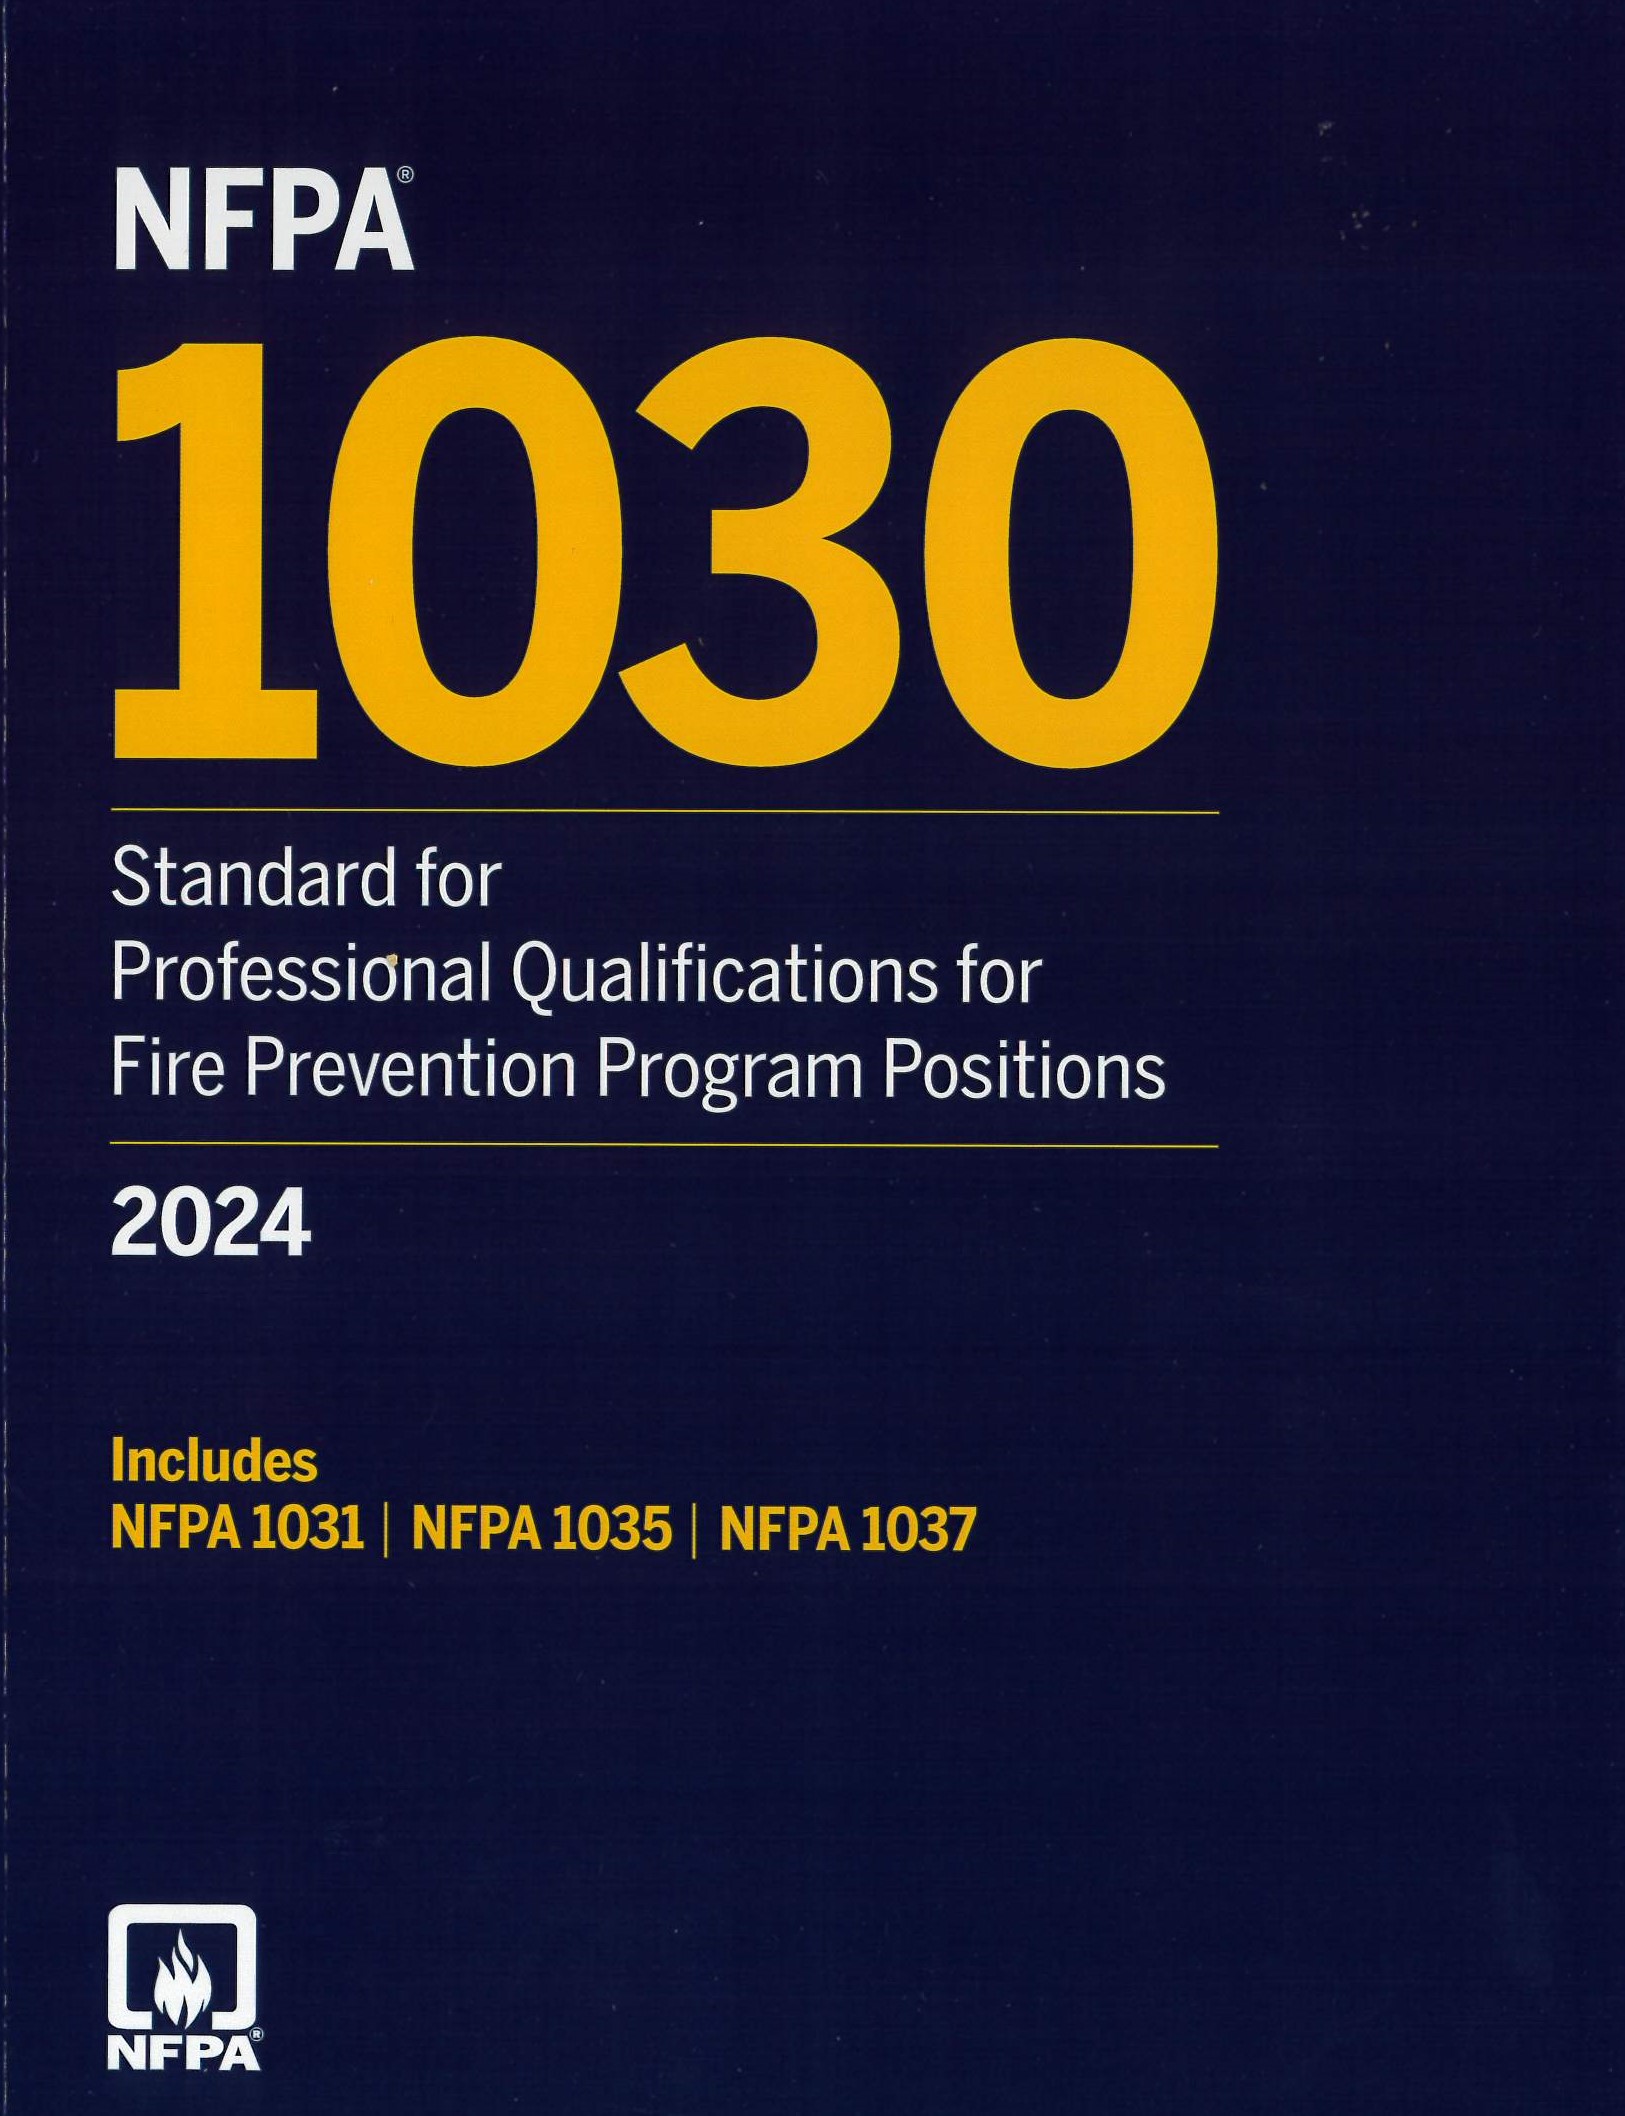 NFPA 1030 2024 Qualifications for Fire Prevention Program Positions